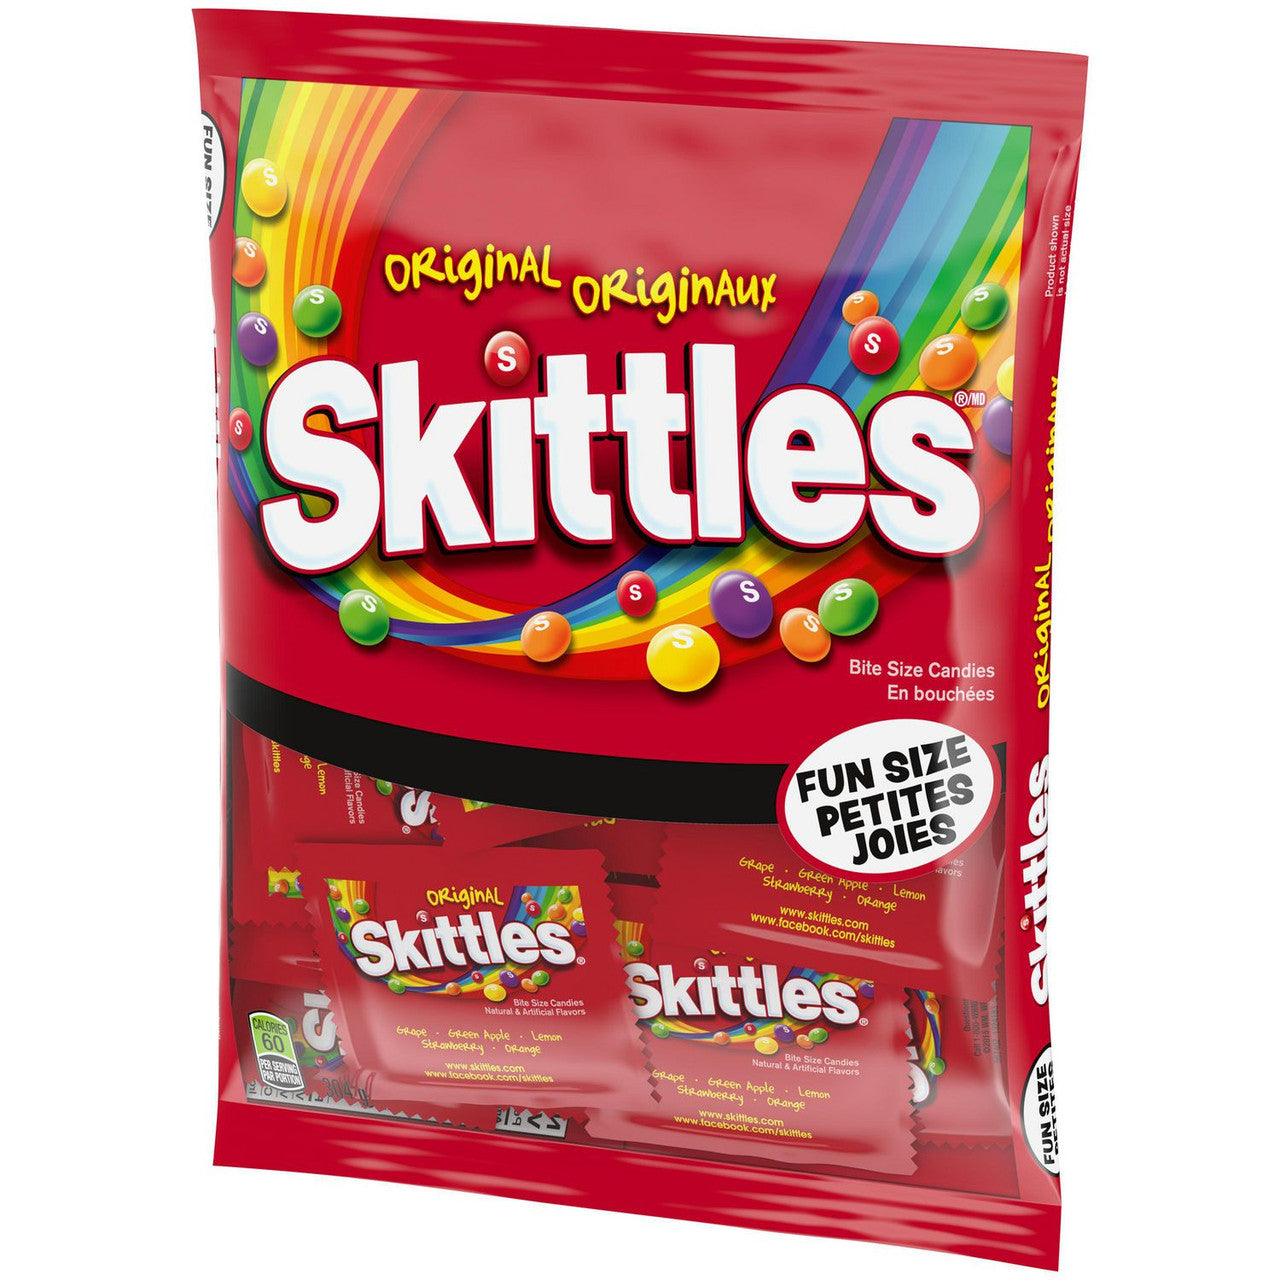 Skittles Original Chewy Candy Fun Size Packets, 24ct, 304g/10 oz. Bag, {Imported from Canada}